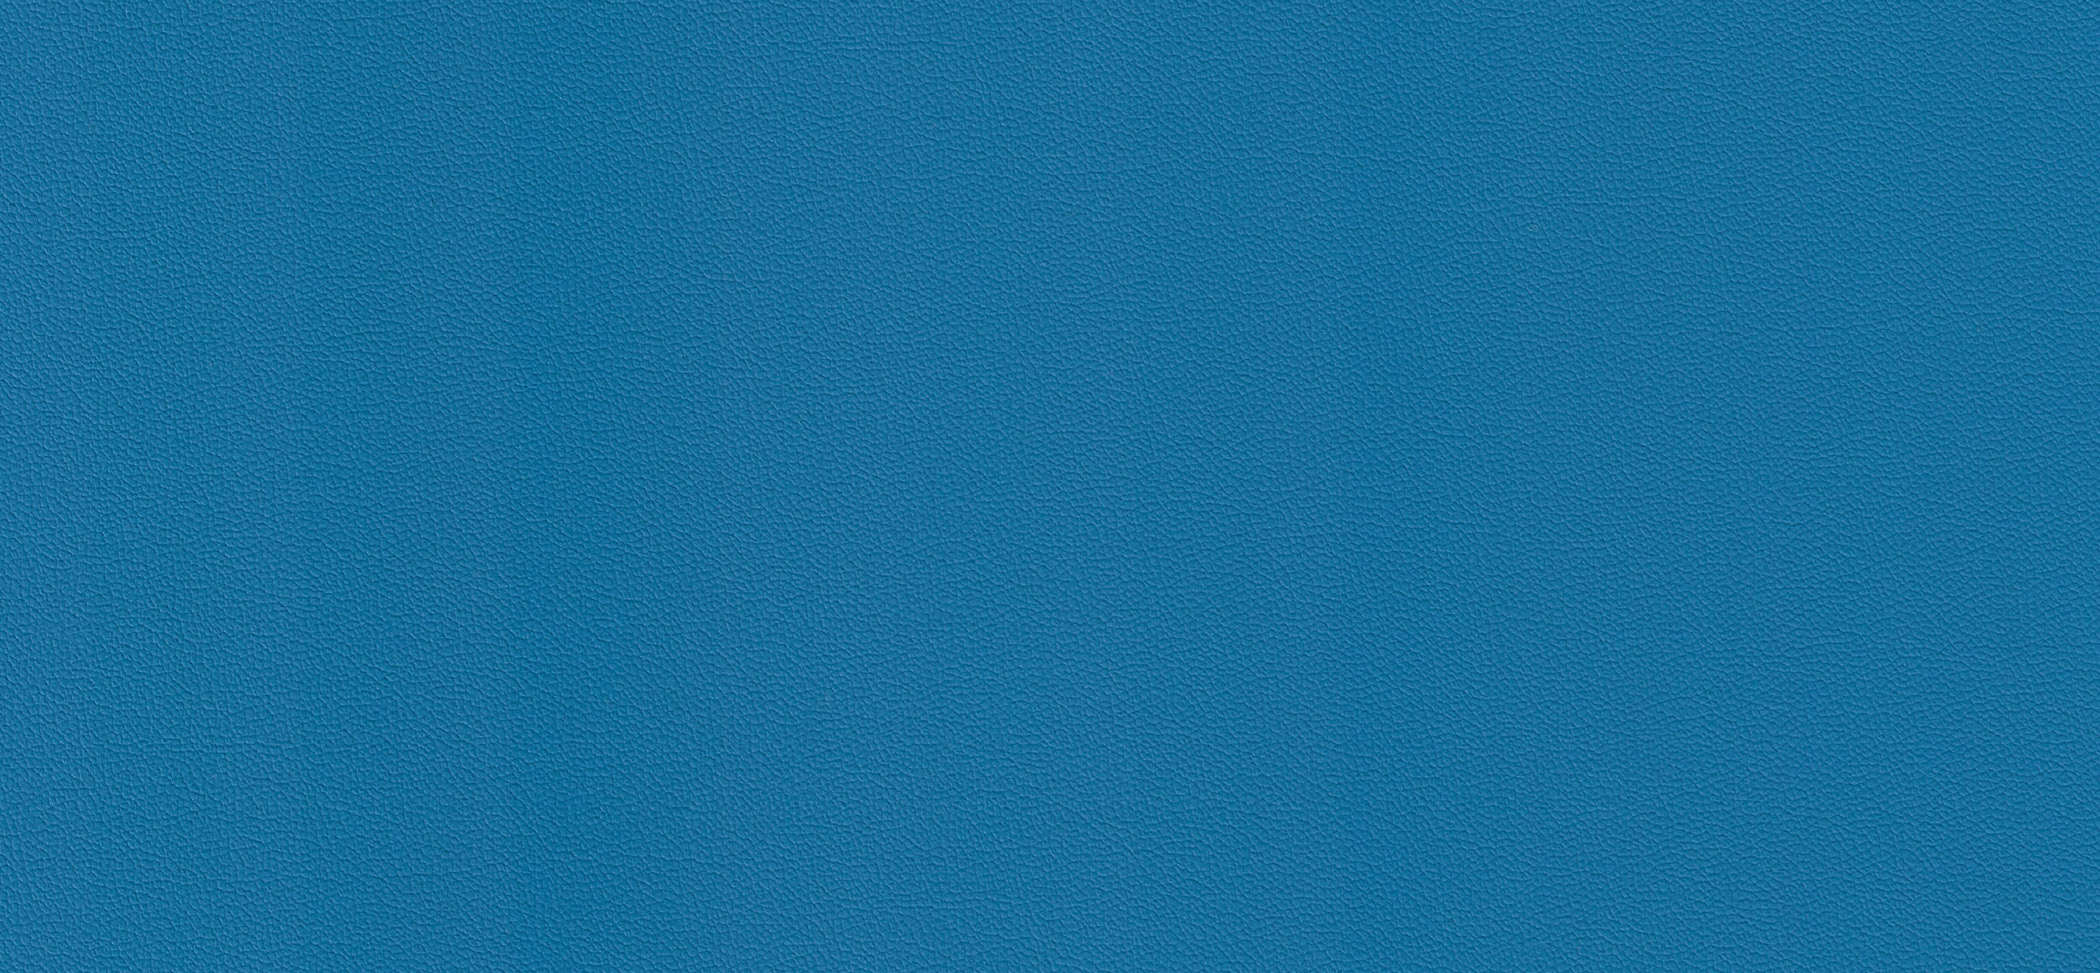 Cleanness blue